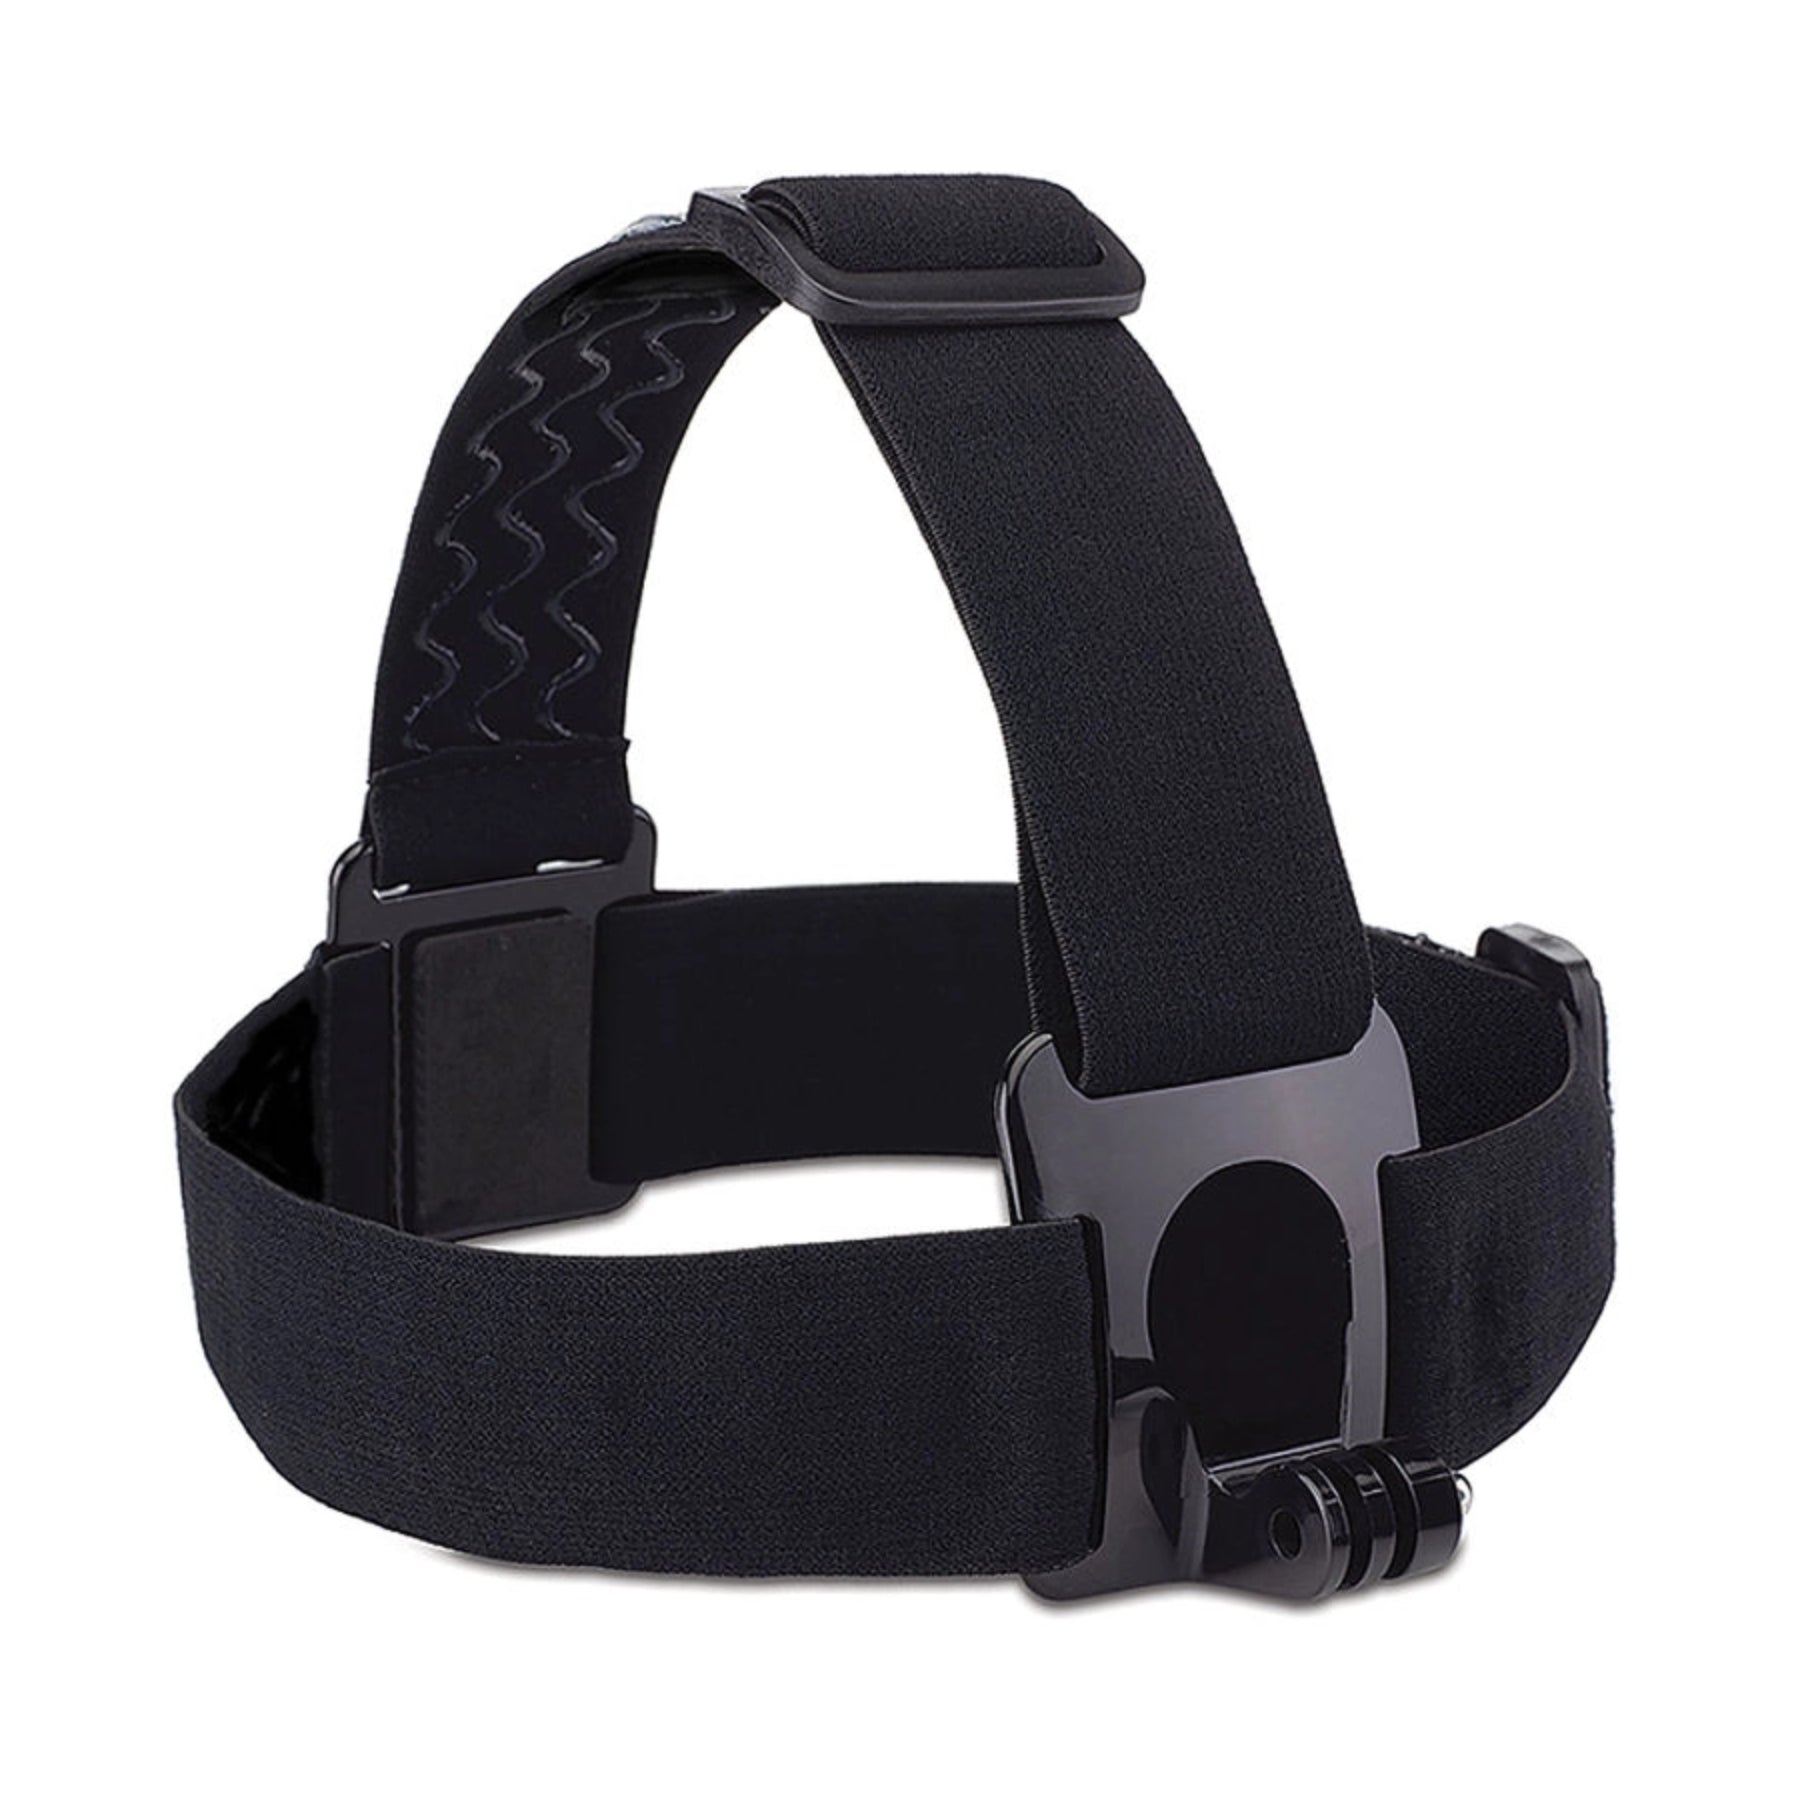 GoPro head strap for hire